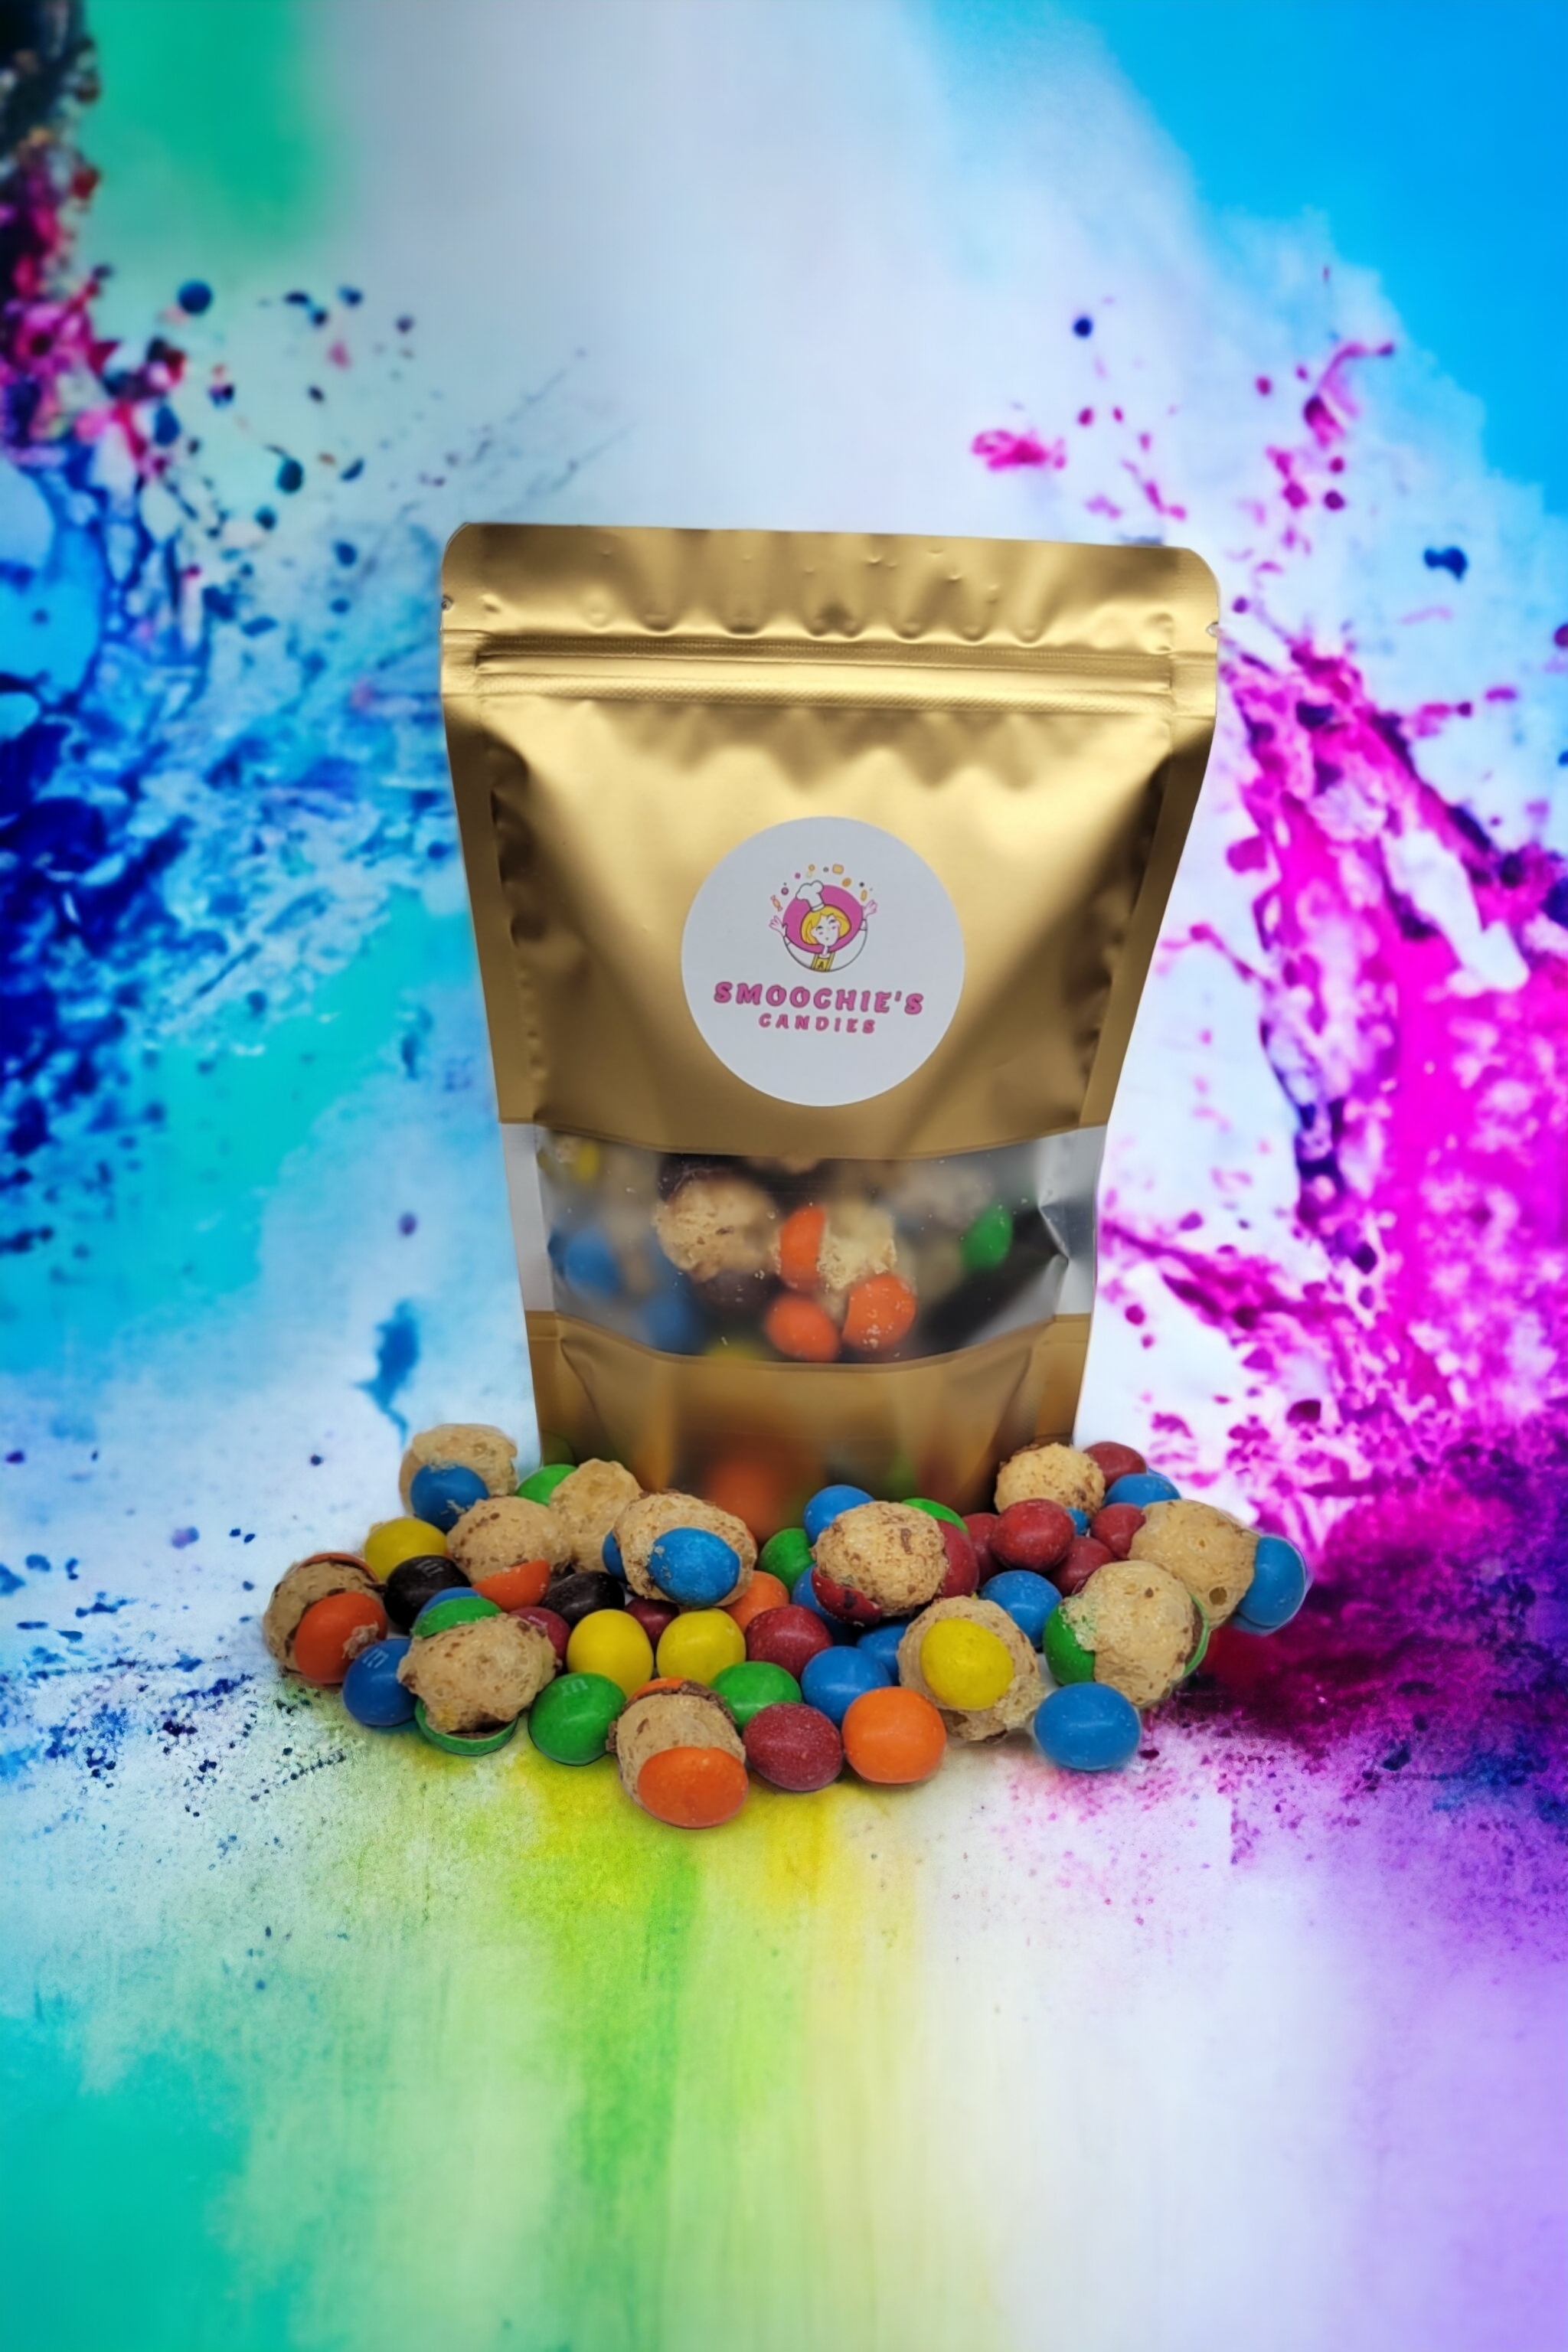 Freeze-Dried Caramel M&M's! (CARAMEL POPPERS) – Crunchy Candy Co.